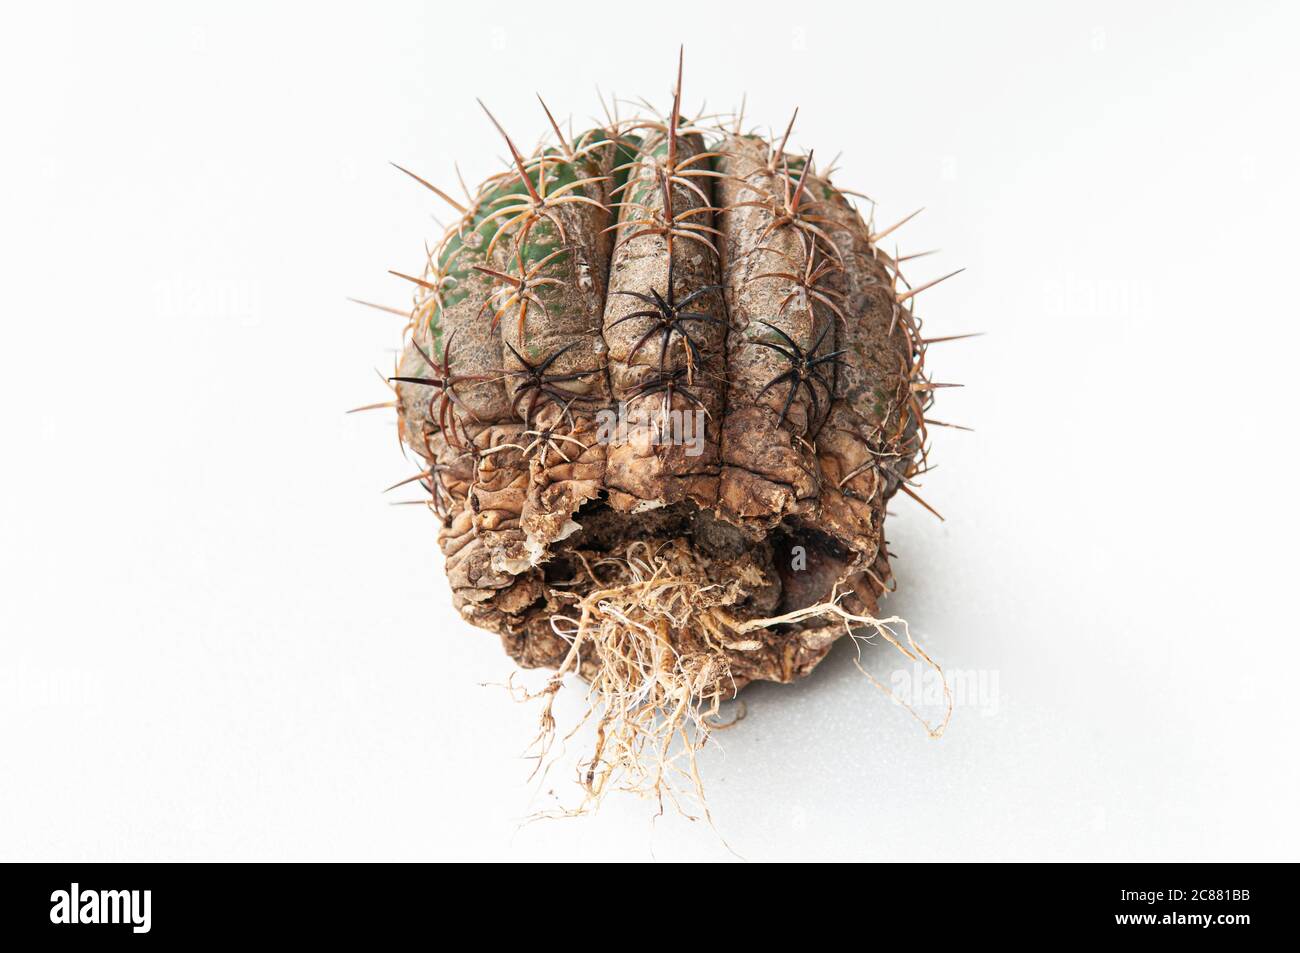 Cactus disease dry root rot caused by fungi, severe damage fungi infected Melocactus isolated on white background showing serious damage on skin Stock Photo